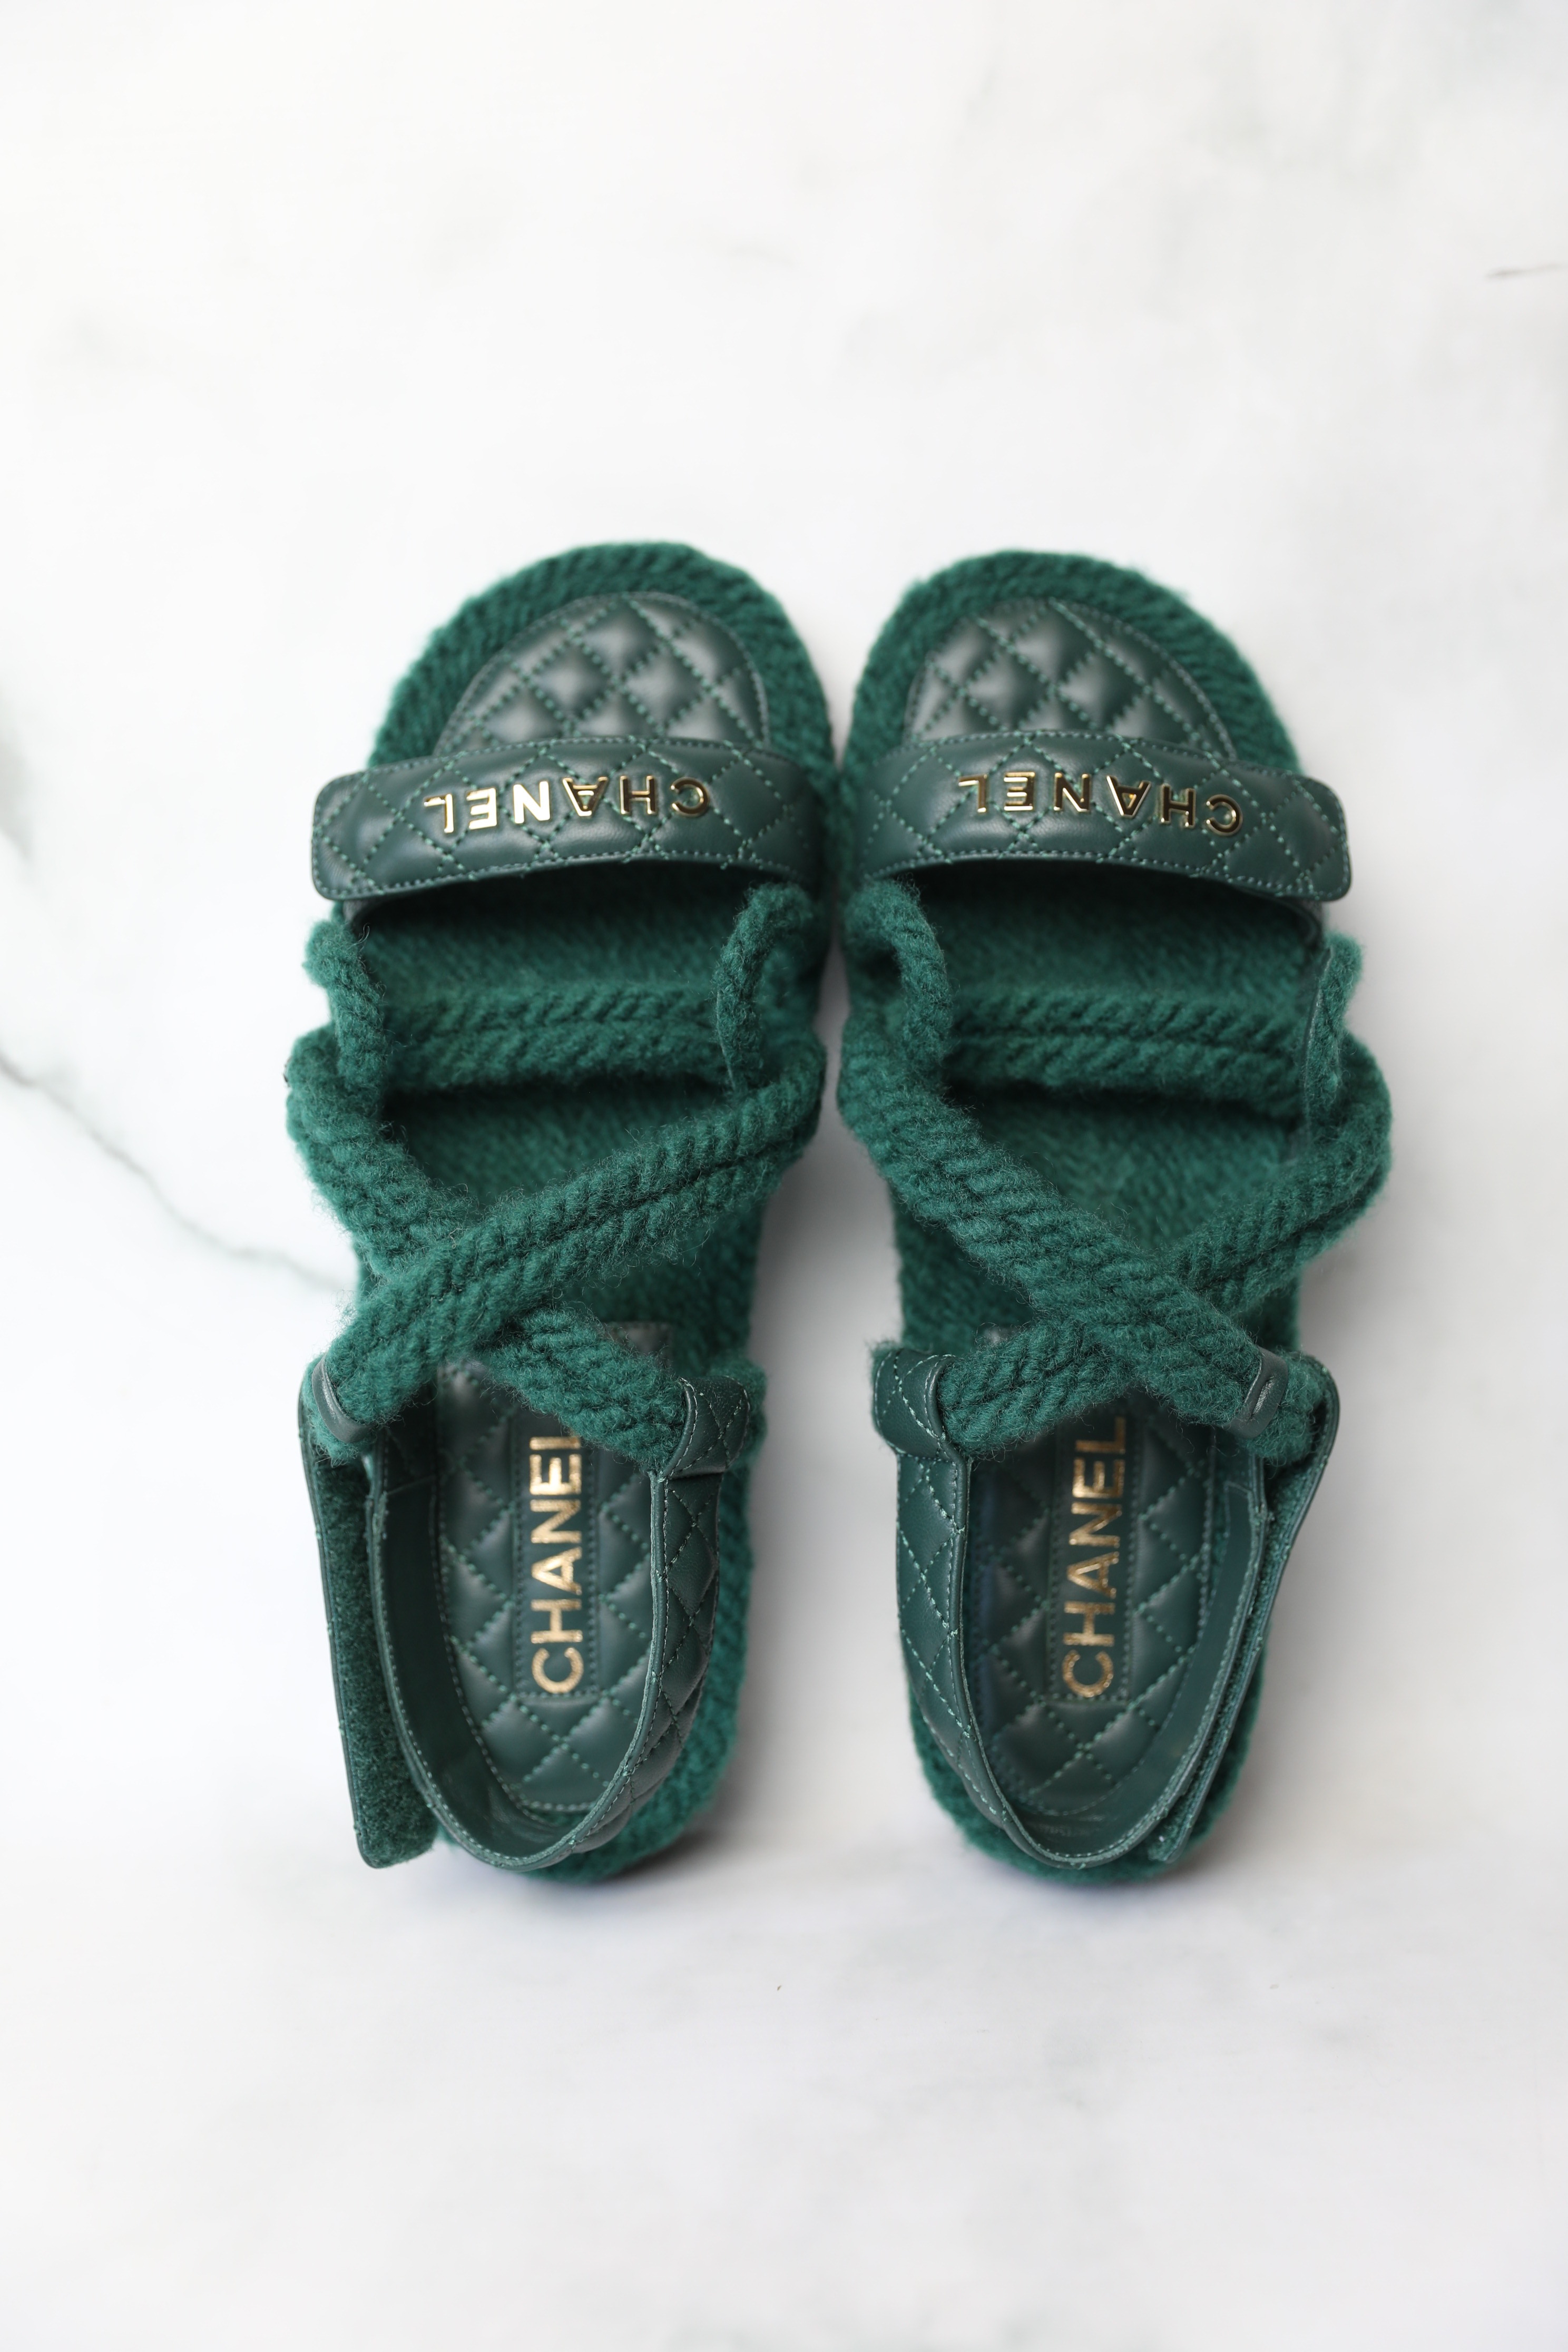 Chanel Shoes Rope Sandals, Green, Size 41, New in Box WA001